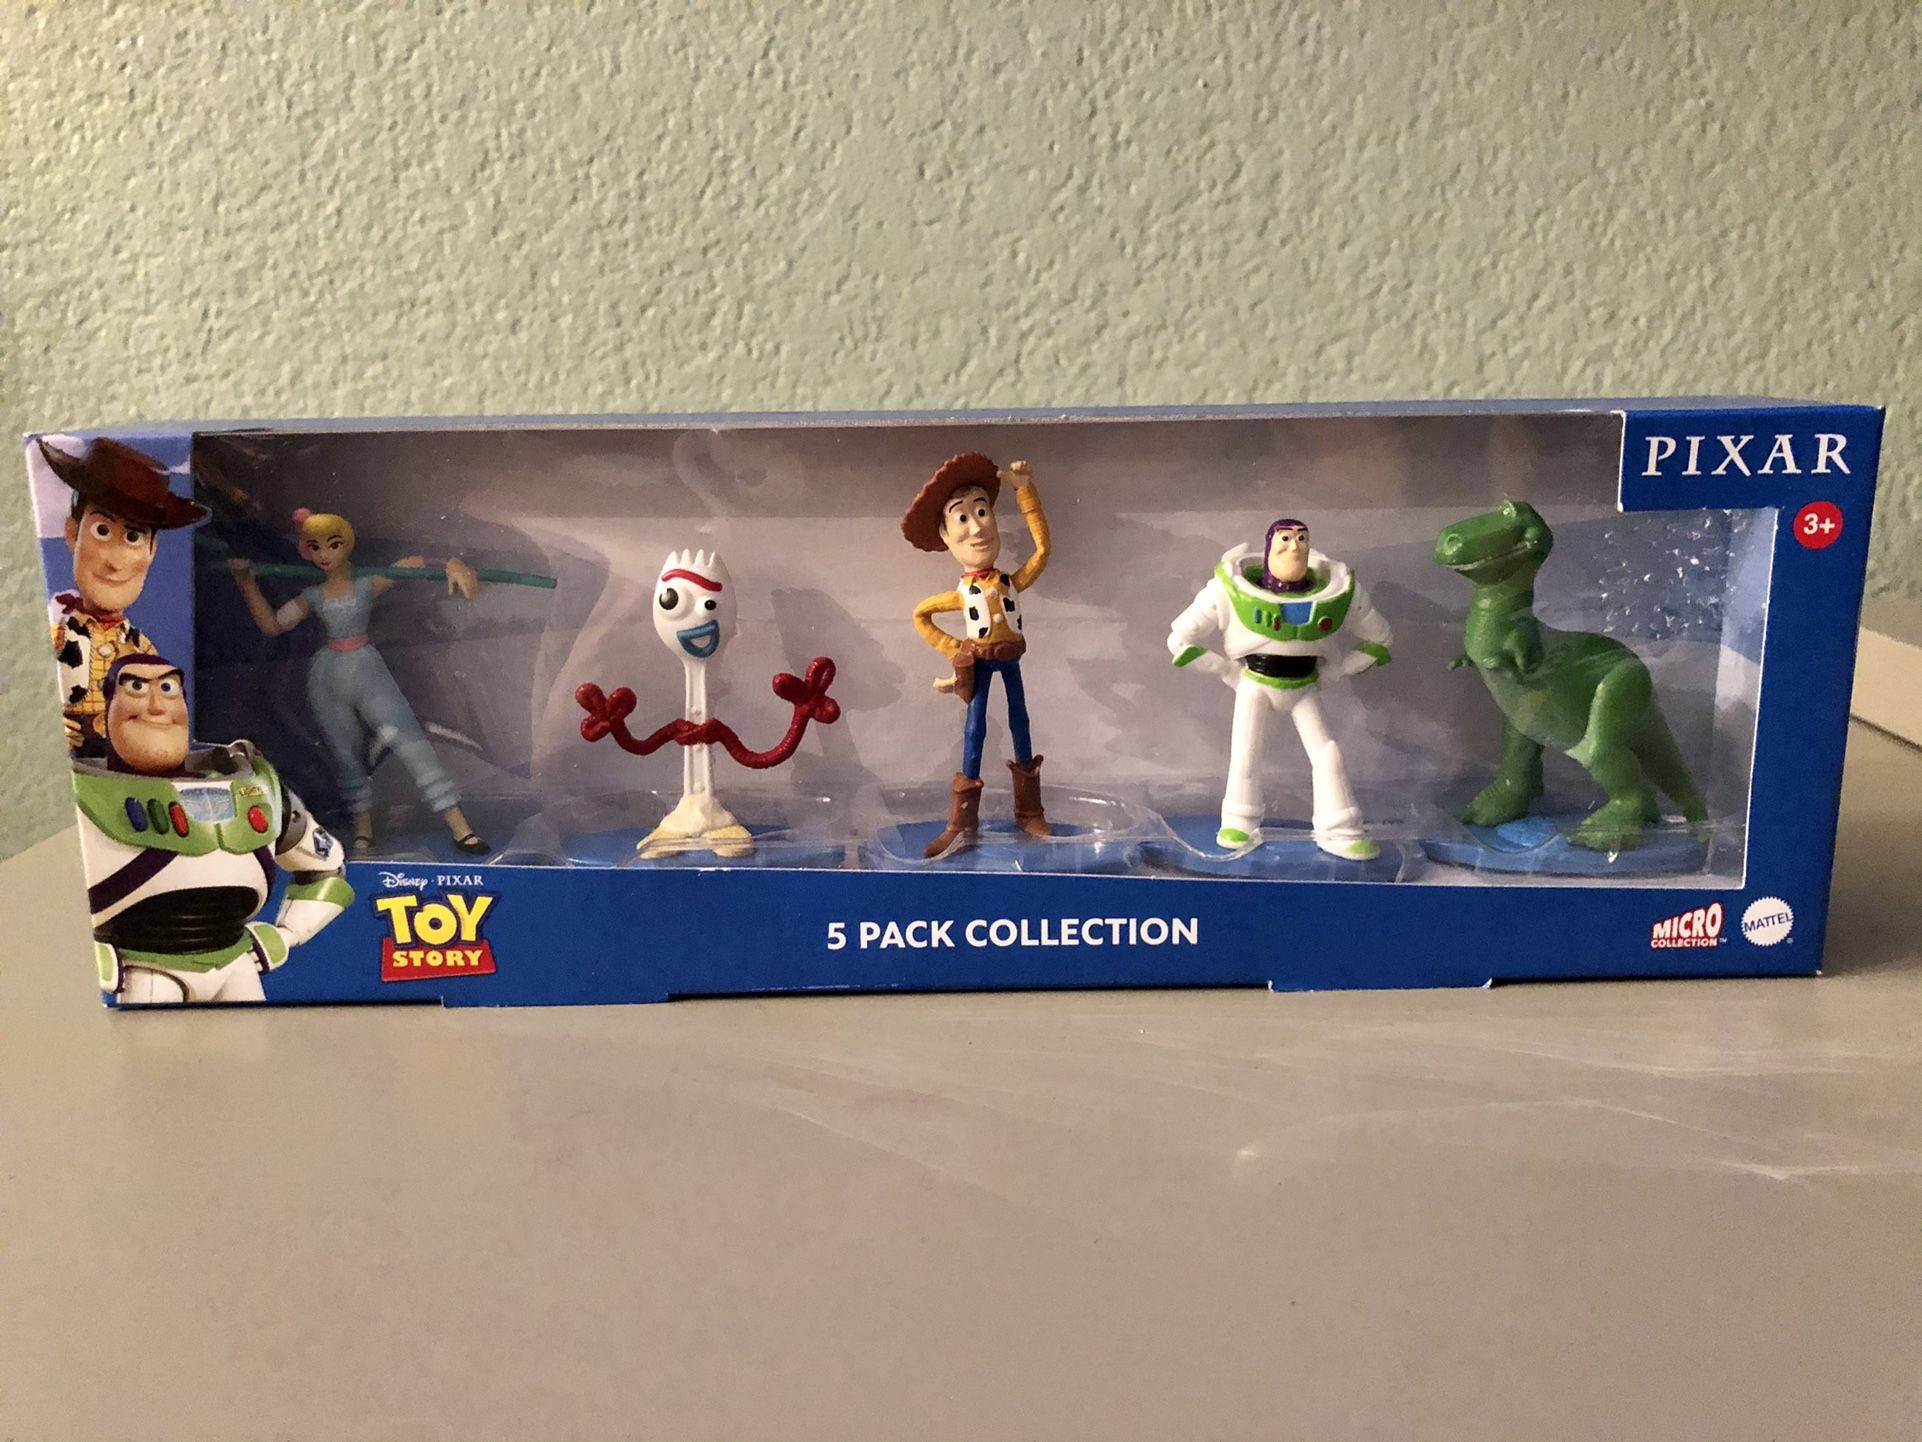 NEW Disney Toy Story 5 pack micro figures * Buzz * Woody * Forky * Rex * Bo Peep